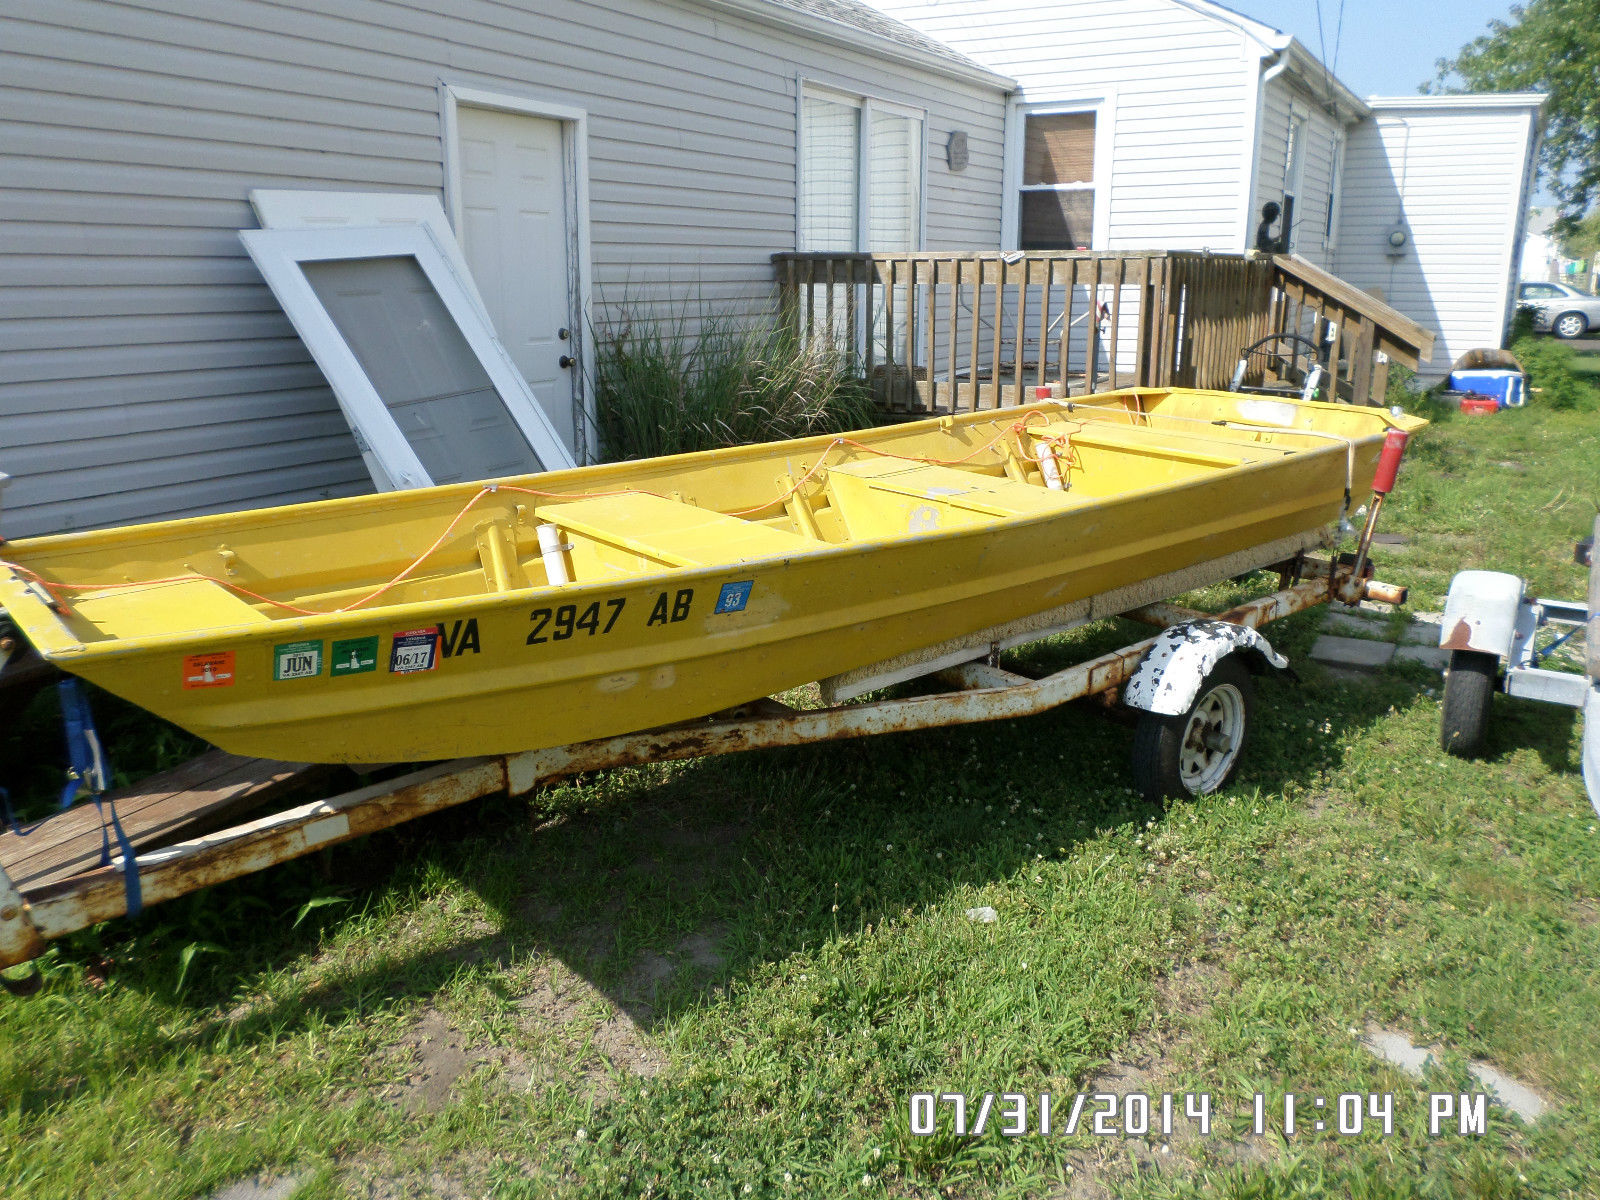 Monark 1975 for sale for $1 - Boats-from-USA.com